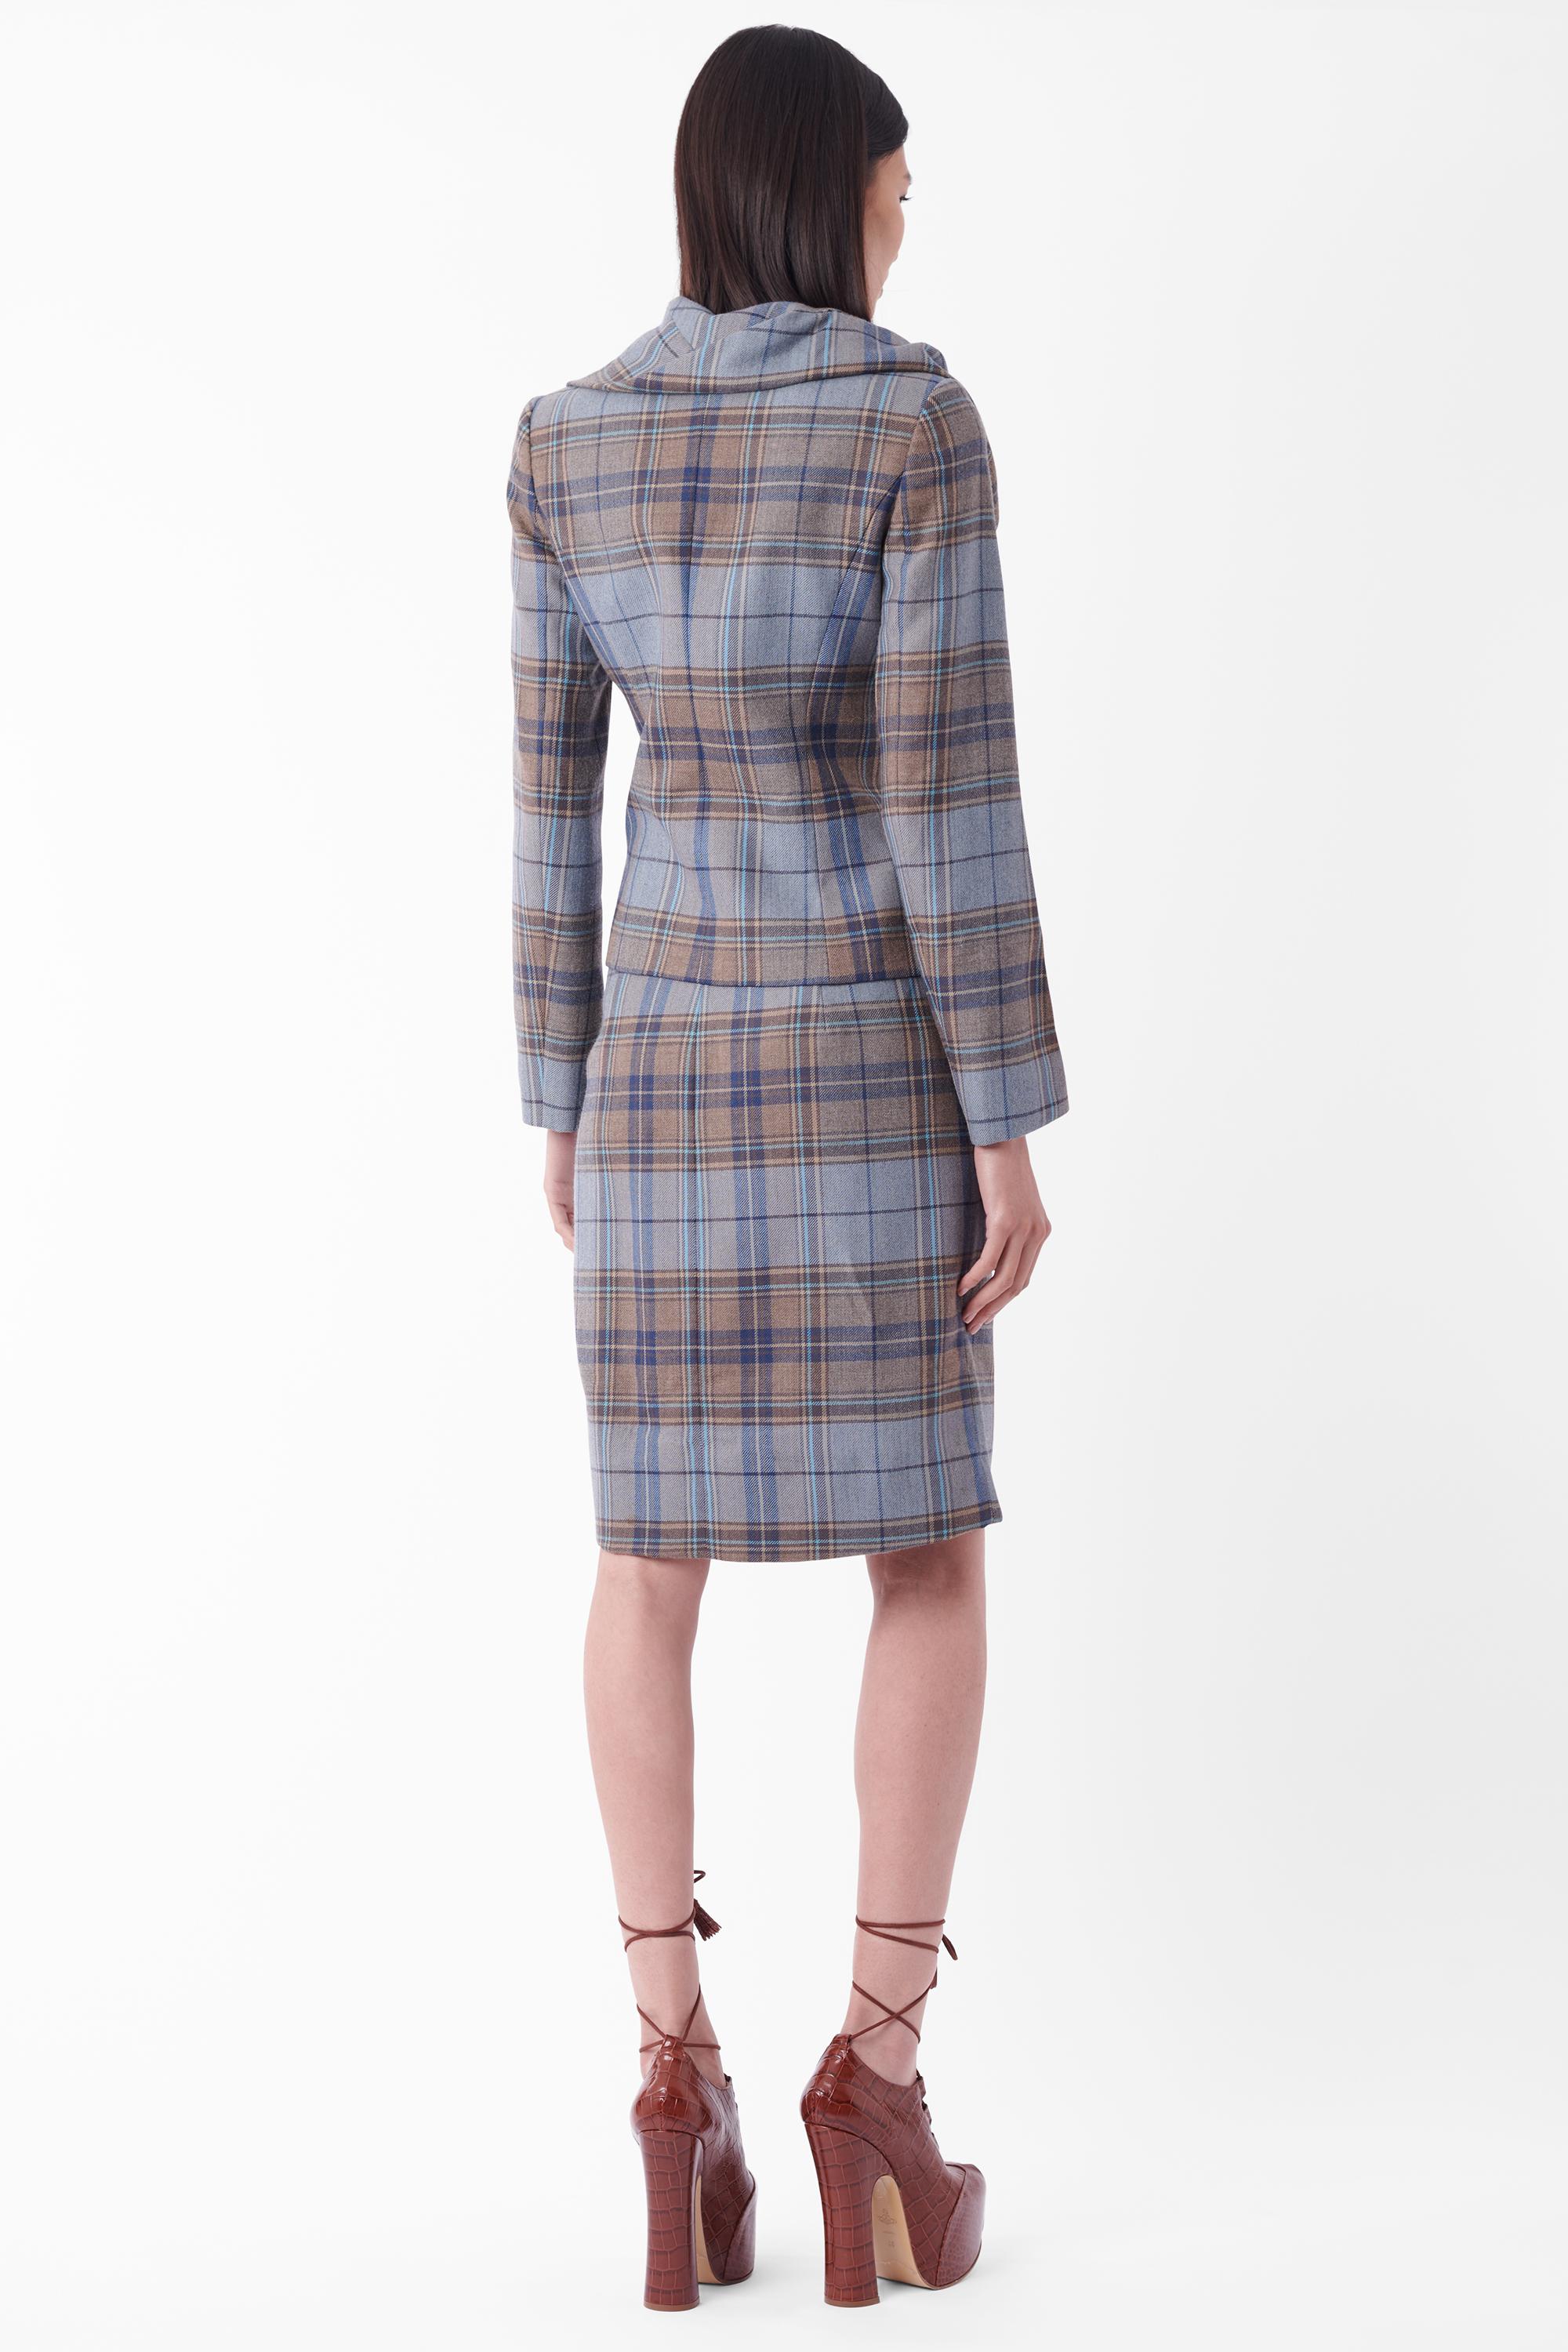 We are excited to present this Vivienne Westwood Fall Winter 2012 blue tartan set. Runways look 14 and 16. Jacket features a drunken asymmetric neckline, non-functioning pockets, orb printed button front closure, darted silhouette and red label tag.